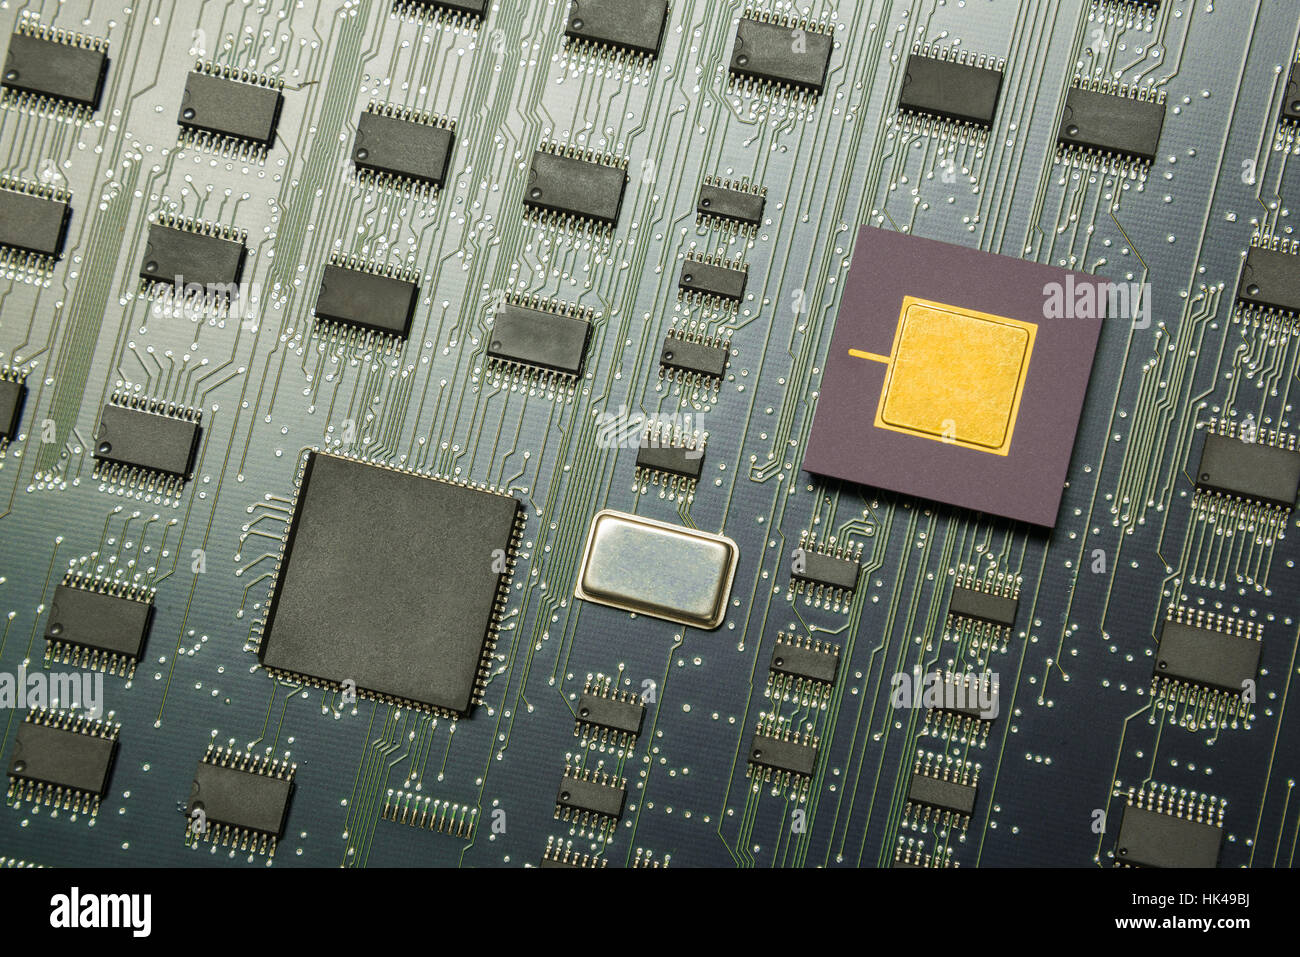 Top view of electronic board with cpu processor and electronic chips technology concept background Stock Photo